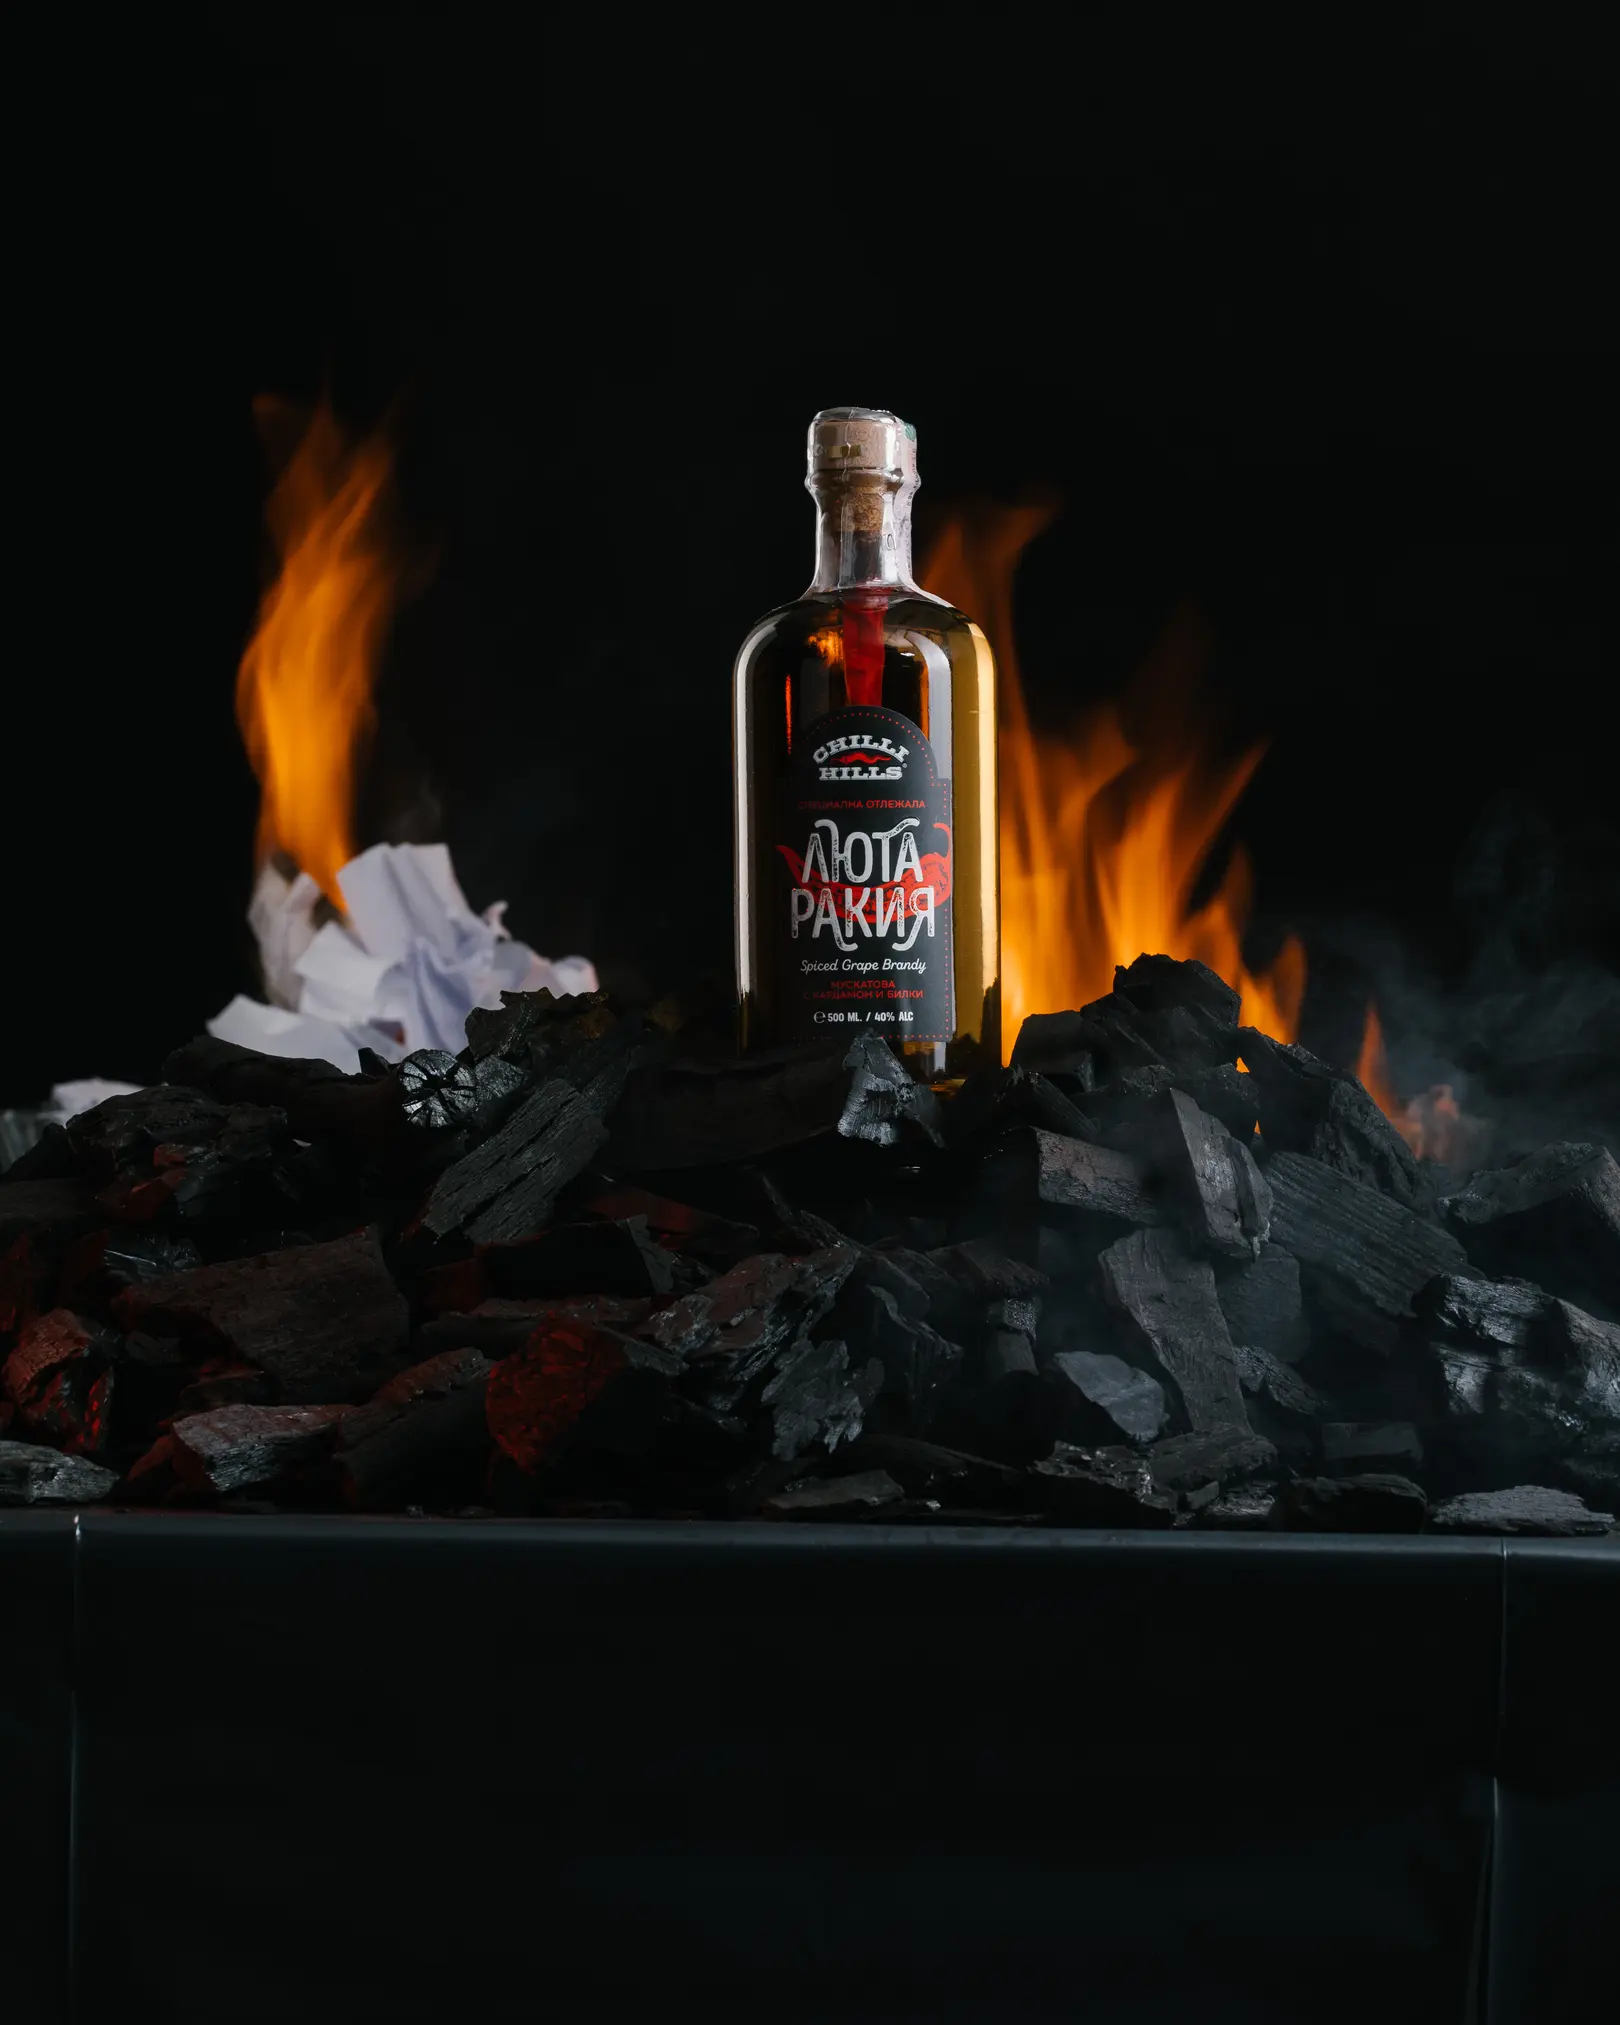 Light Schema 3 Result 2. The photo shows the result of shooting a bottle according to the light scheme shown 1 frame earlier. The viewer sees the label of the bottle. Also, viewers can see the fire in the background.